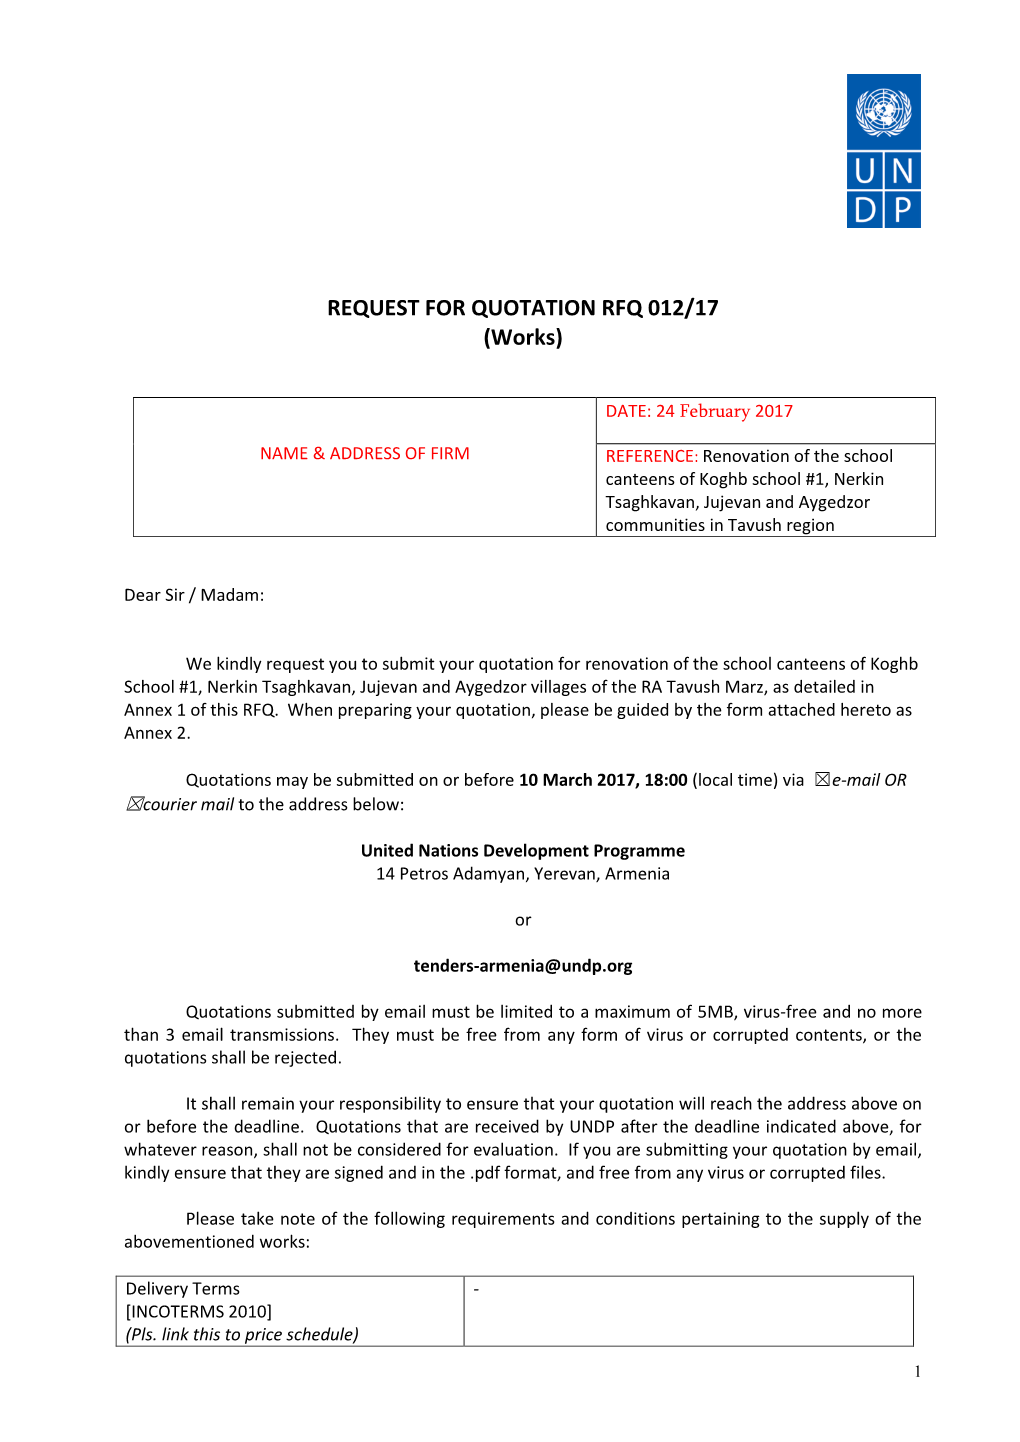 REQUEST for QUOTATION RFQ 012/17 (Works)